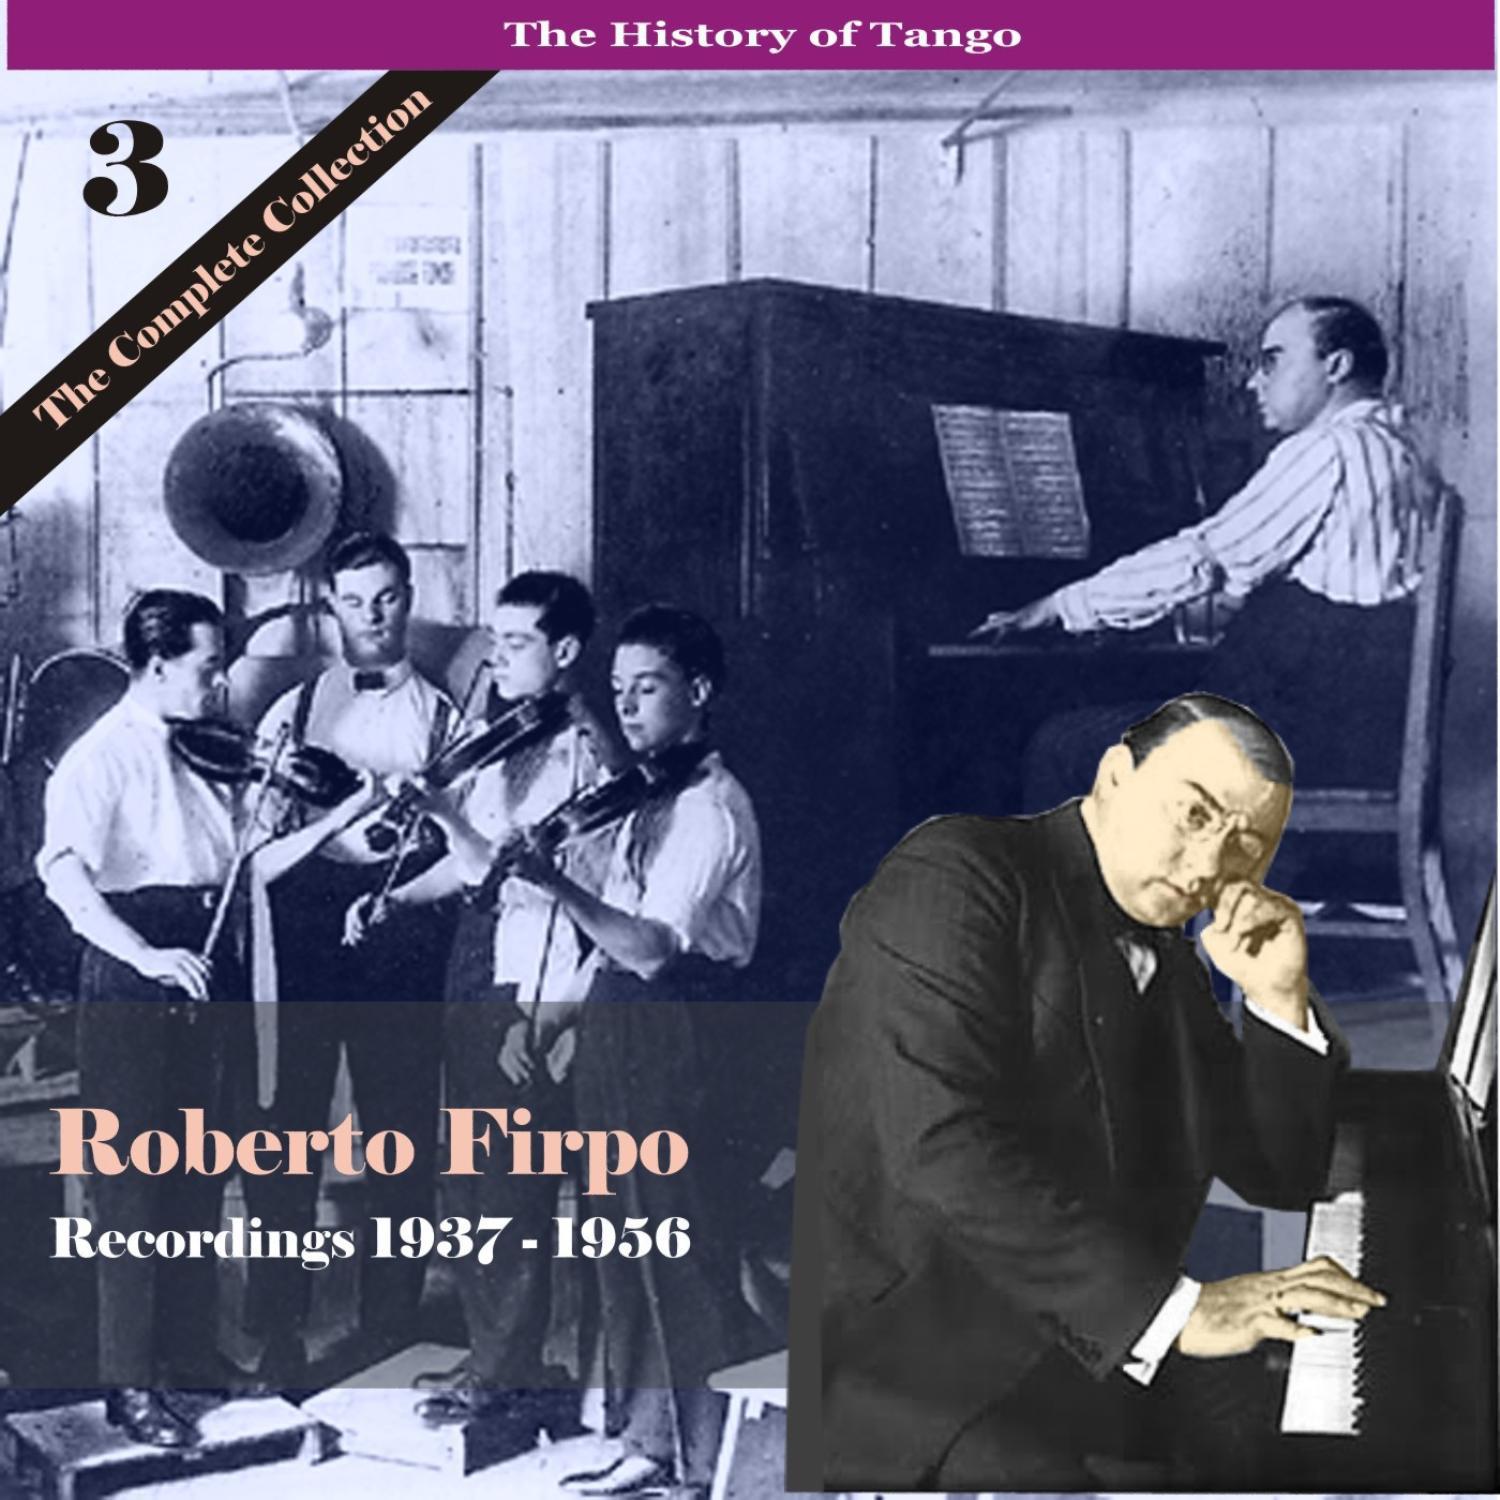 The History of Tango / Roberto Firpo - The Complete Collection, Volume 3 - Recordings 1937 - 1956